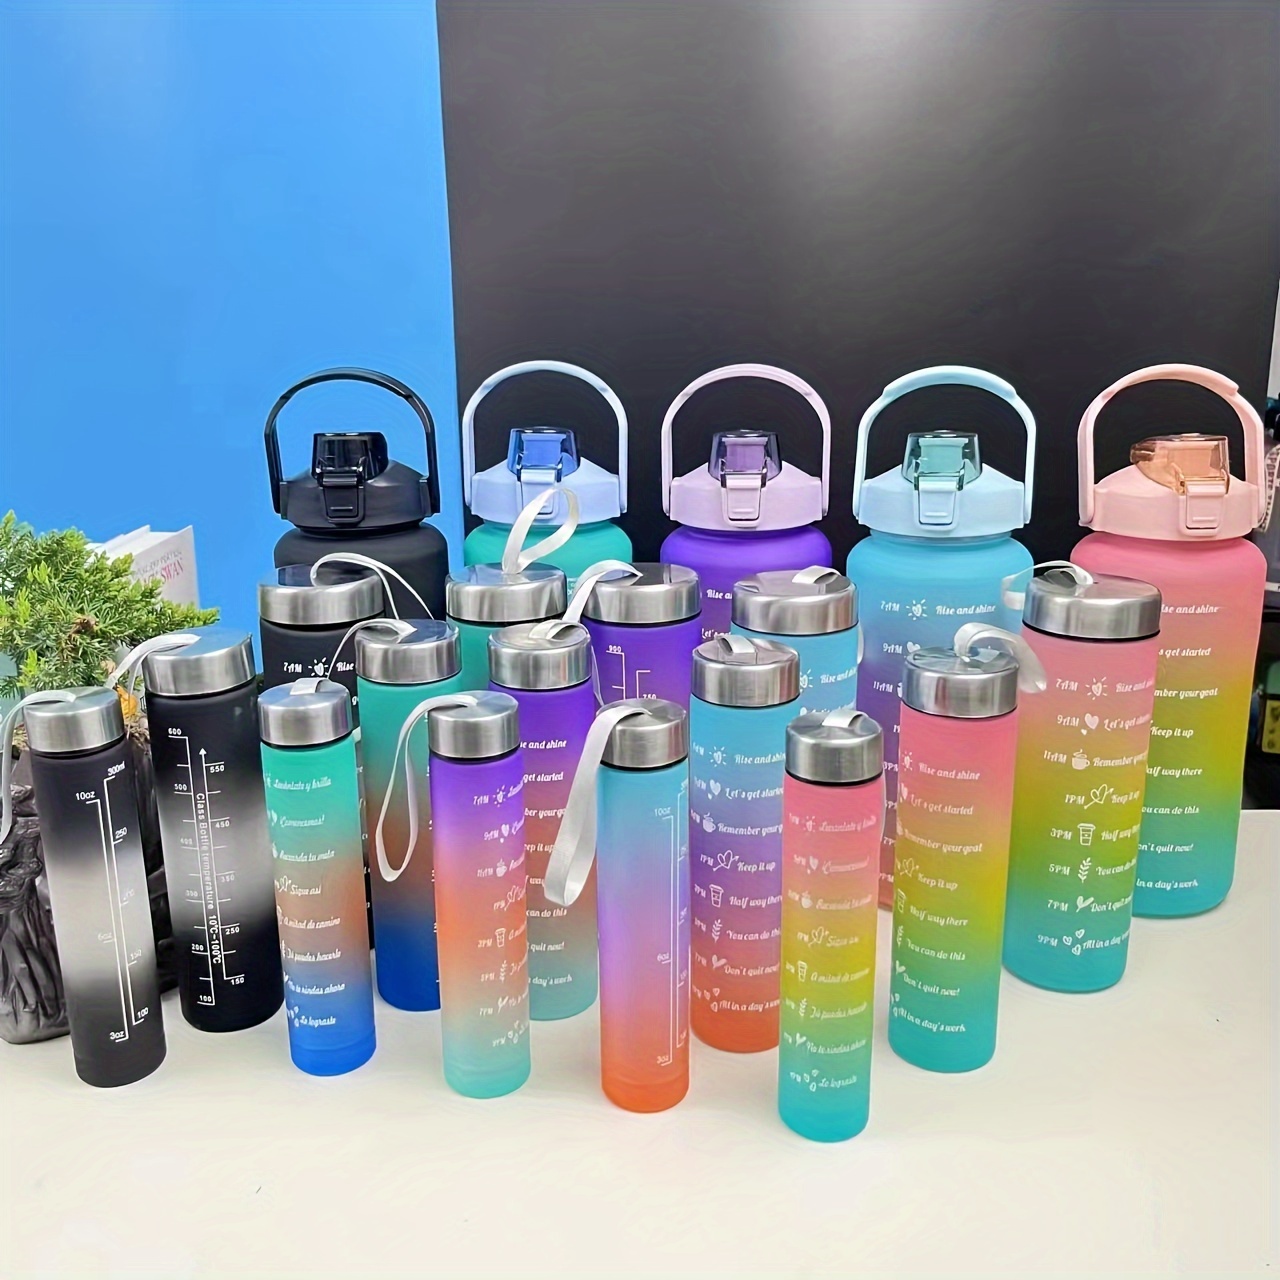 

4pcs, Motivational Water Bottle Set, 300ml+600ml+900ml+2l Water Bottles, Sports Water Cups, Portable Drinking Cups, Summer Drinkware, For Outdoor Camping, Hiking, Fitness, Birthday Gifts